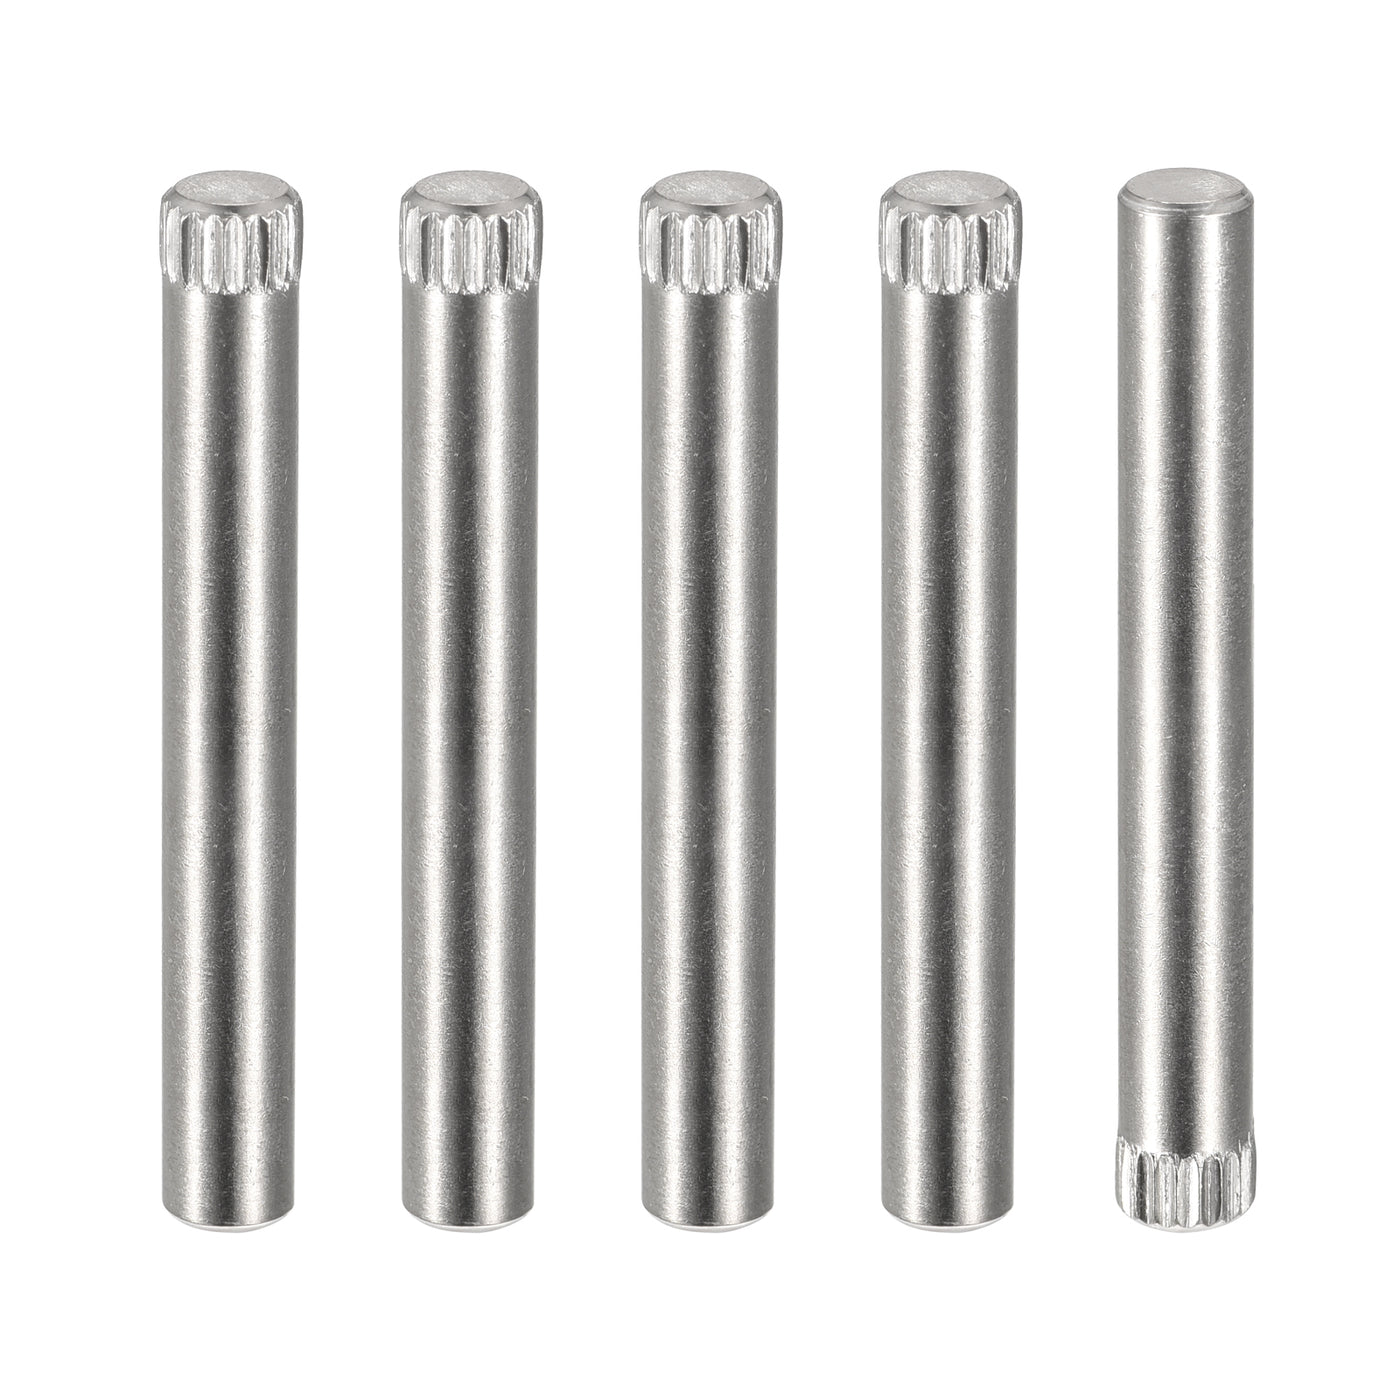 uxcell Uxcell 5x40mm 304 Stainless Steel Dowel Pins, 5Pcs Knurled Head Flat End Dowel Pin